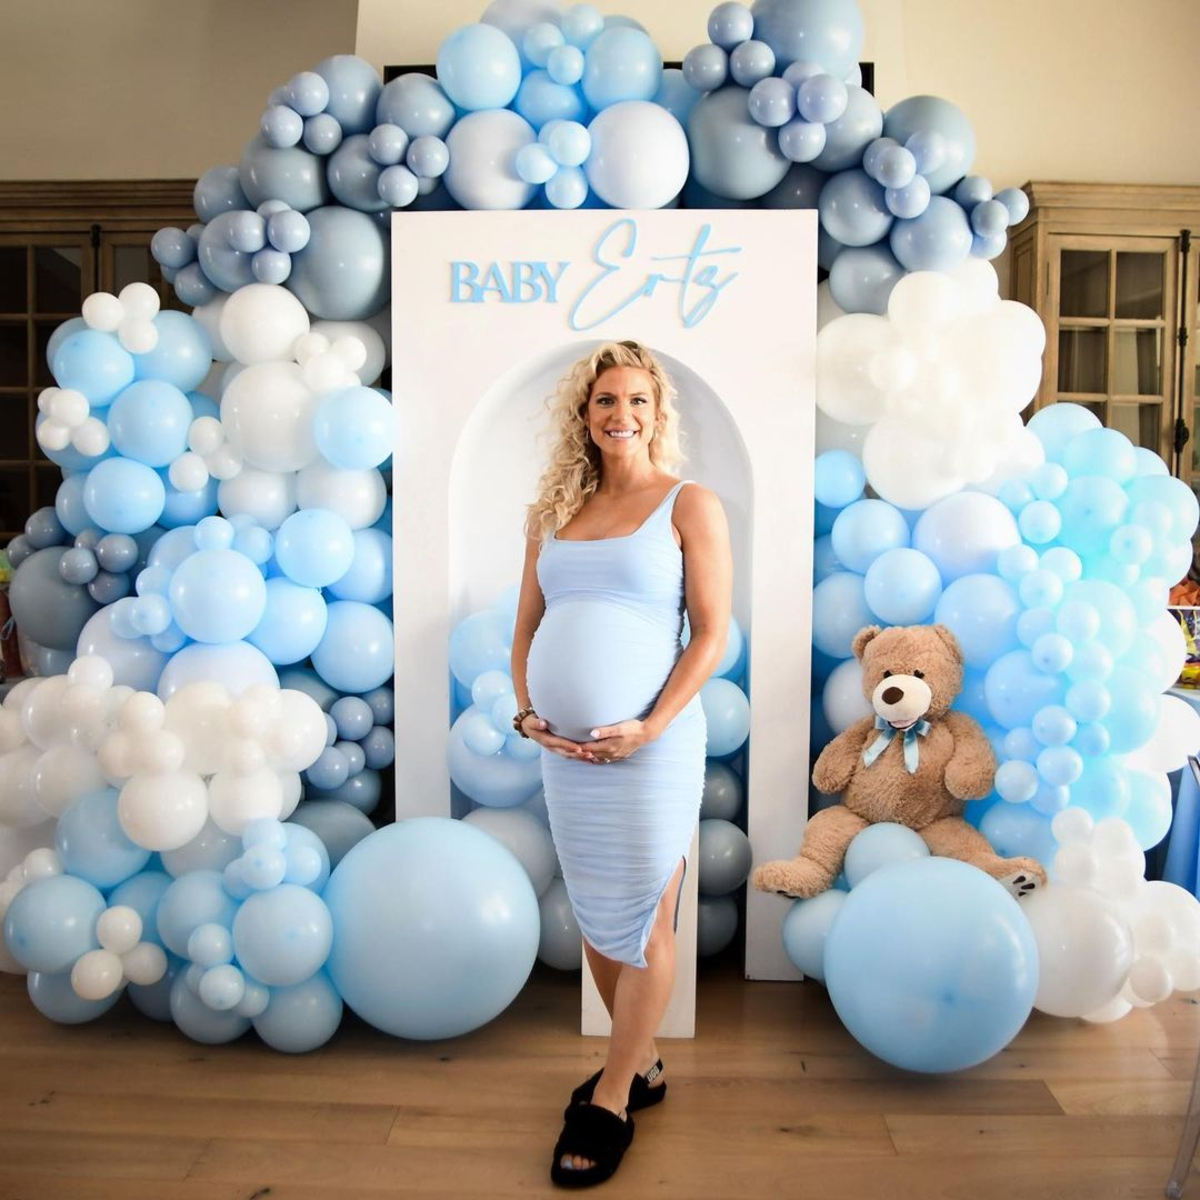 Photos from Celeb Baby Showers - E! Online